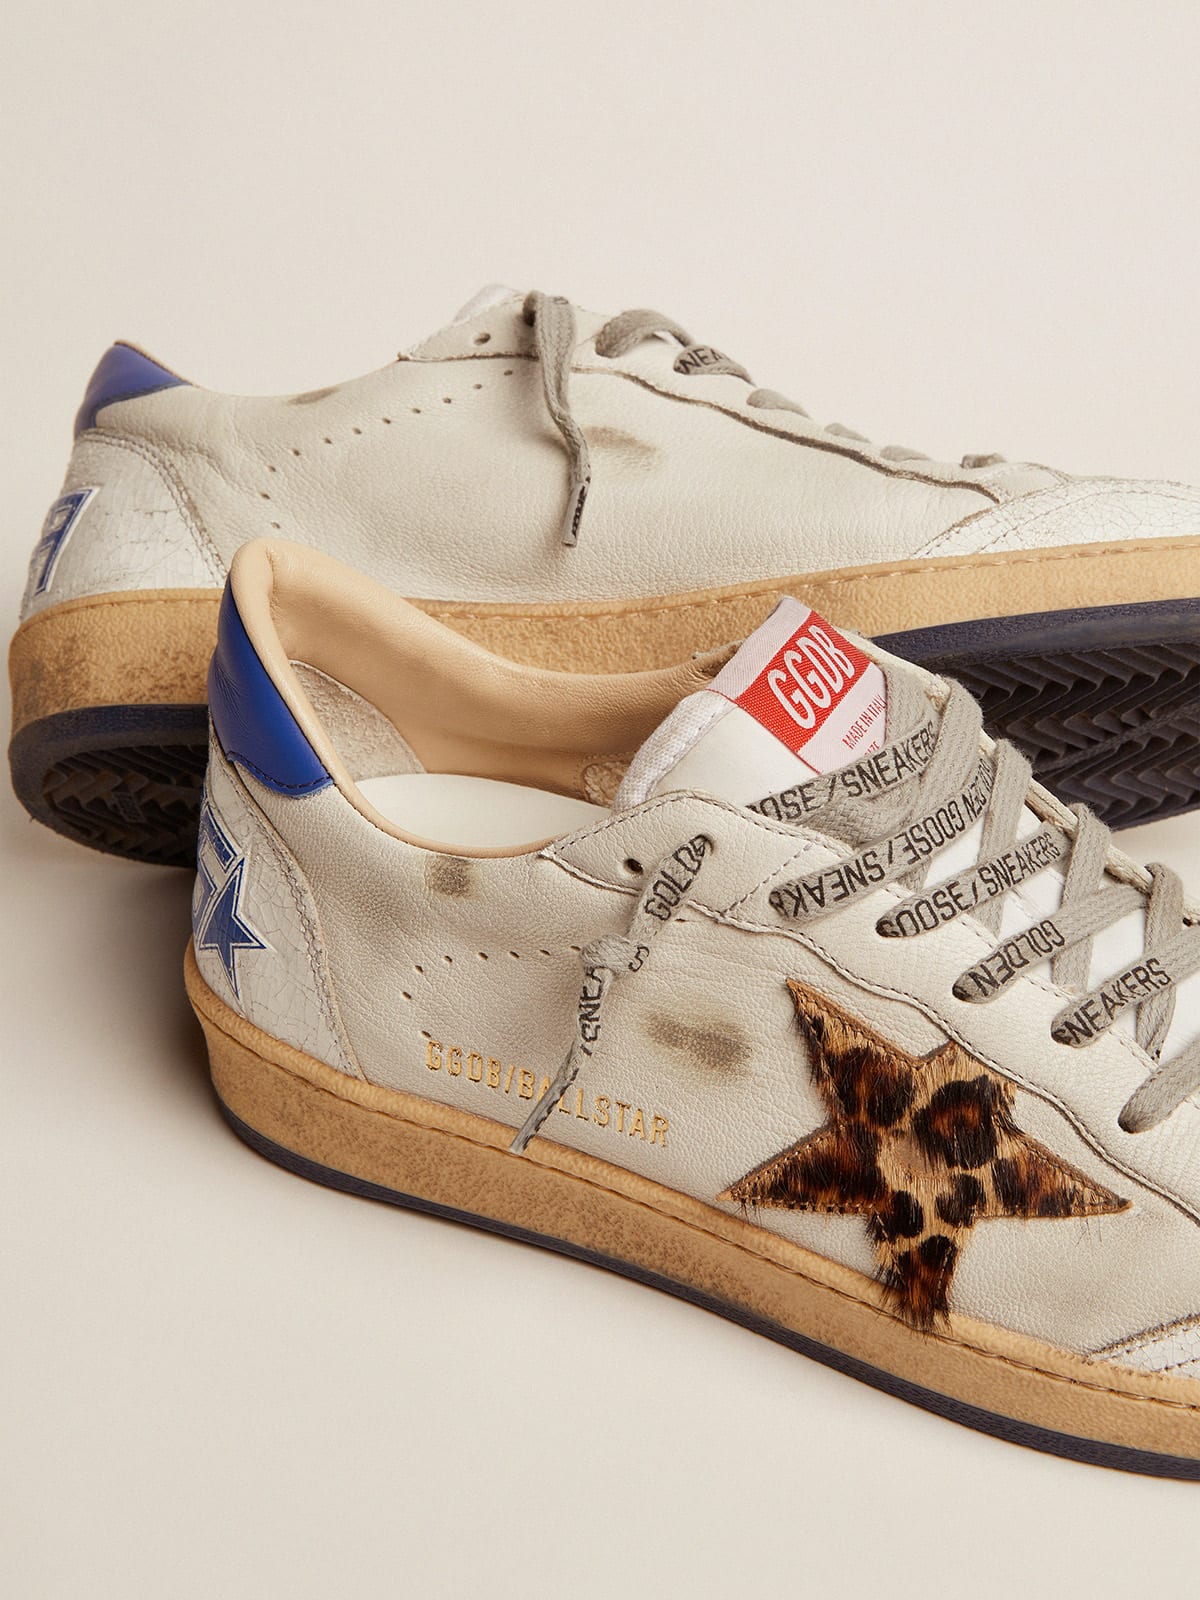 Golden Goose - Ball Star sneakers in white leather with light blue details in 